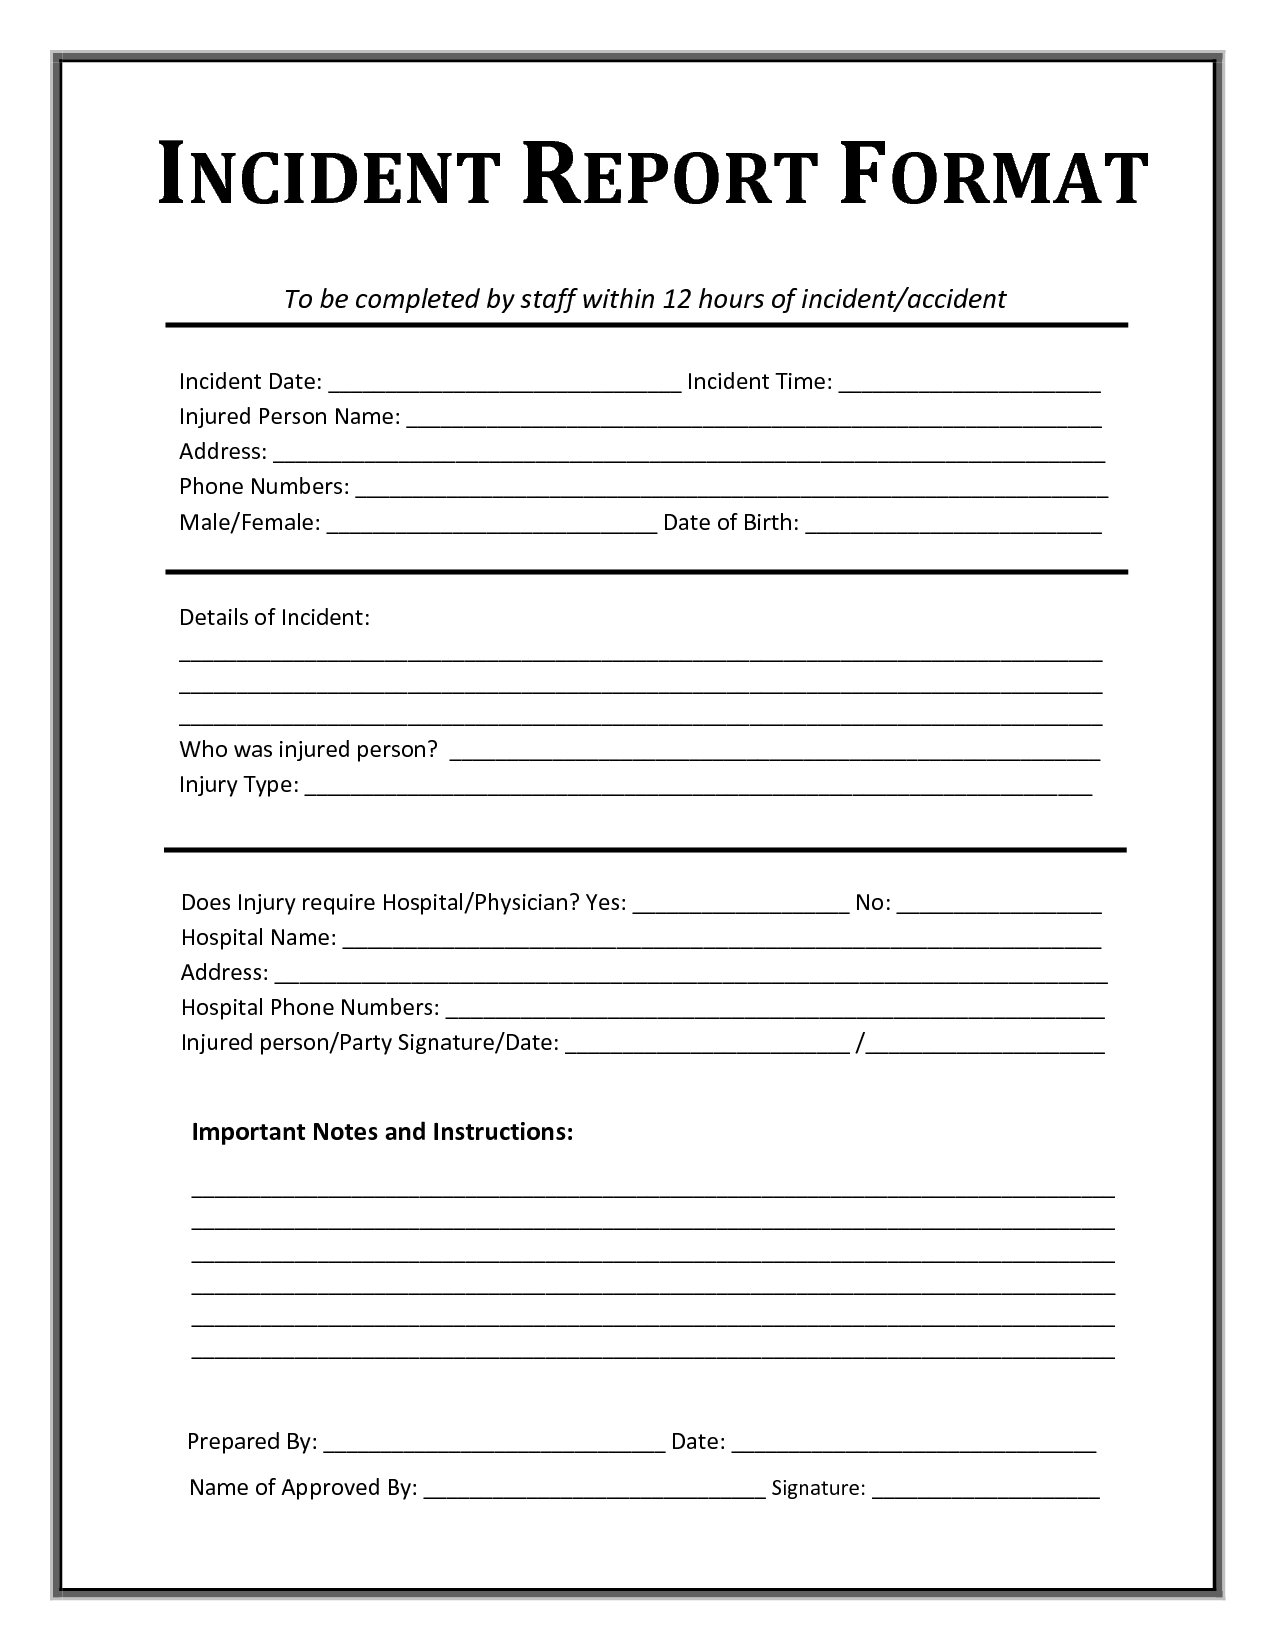 Free Printable Incident Report Format And Template For Employee 